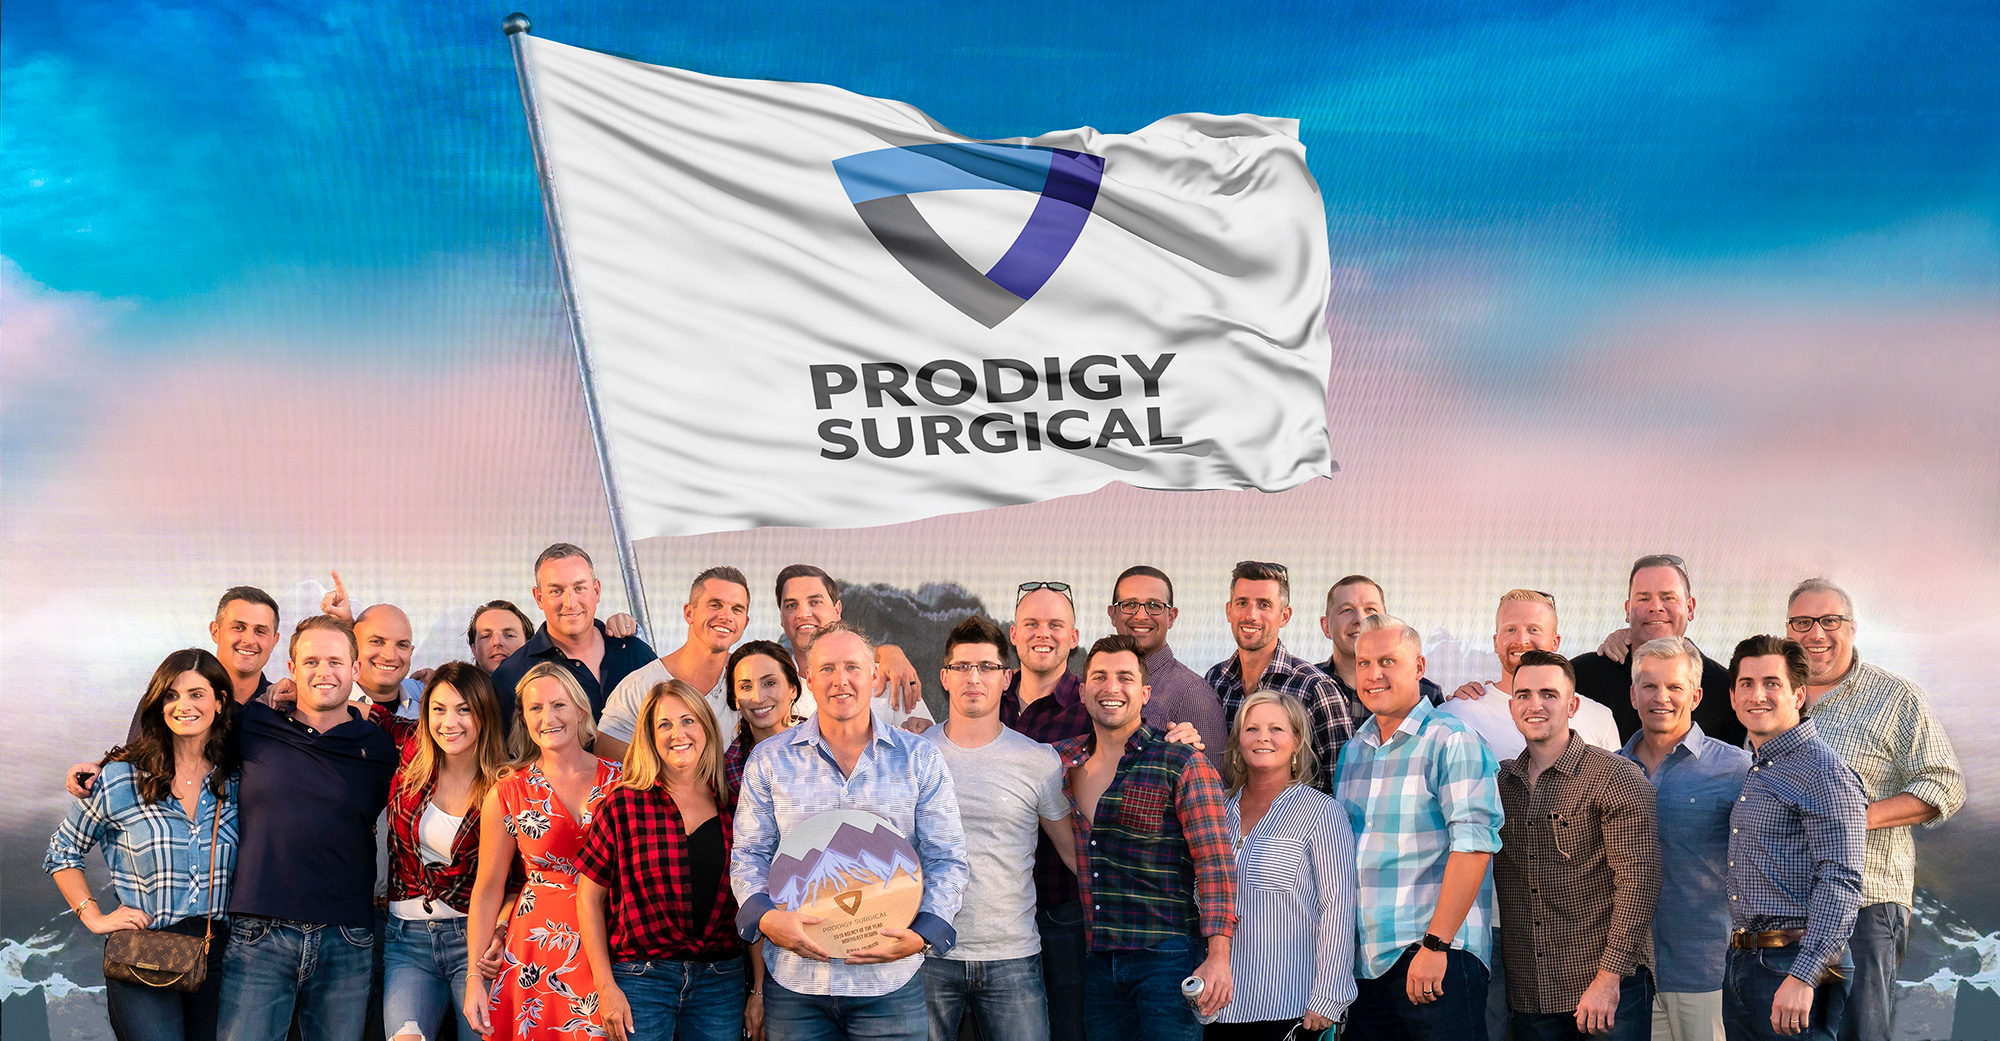 Group picture of Prodigy Surgical team members.